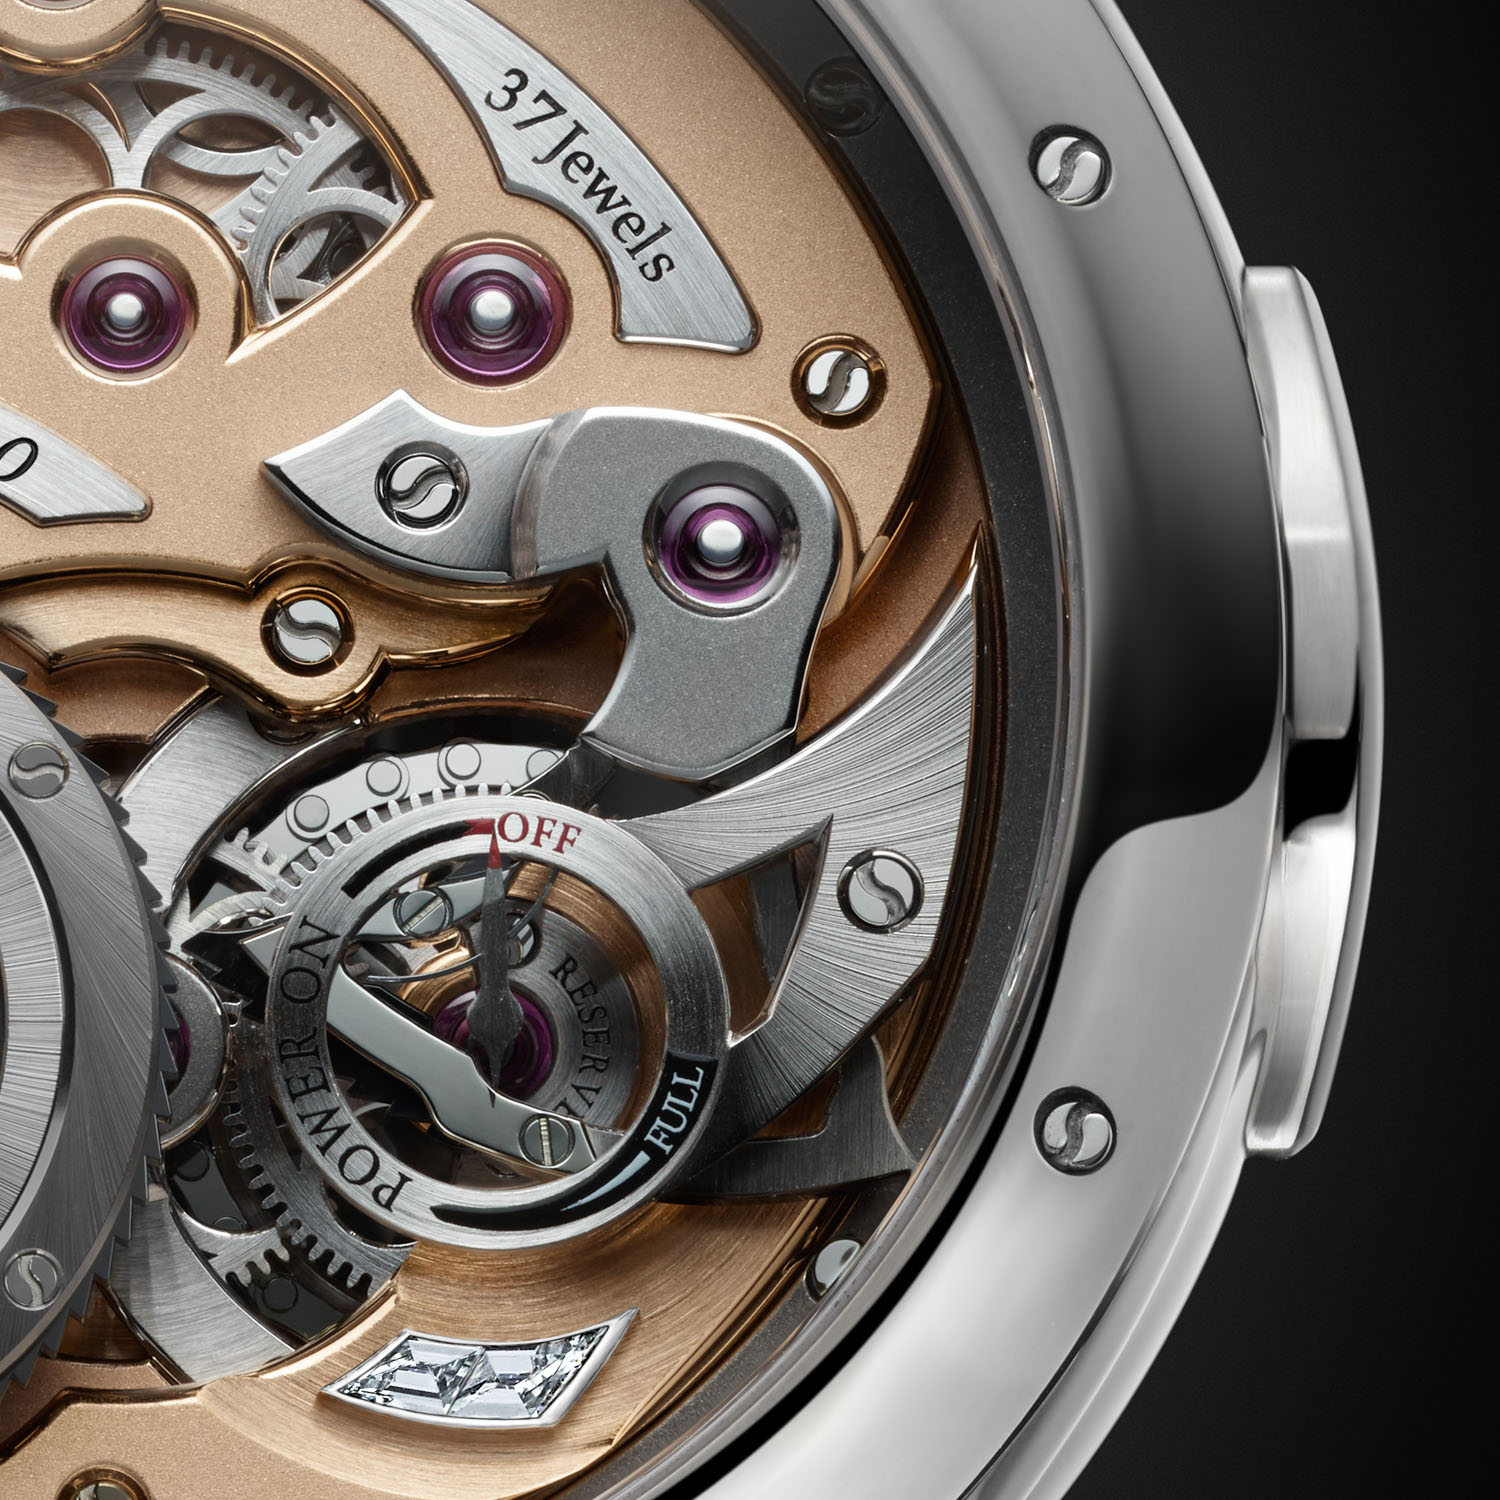 Romain Gauthier Logical One Final Editions